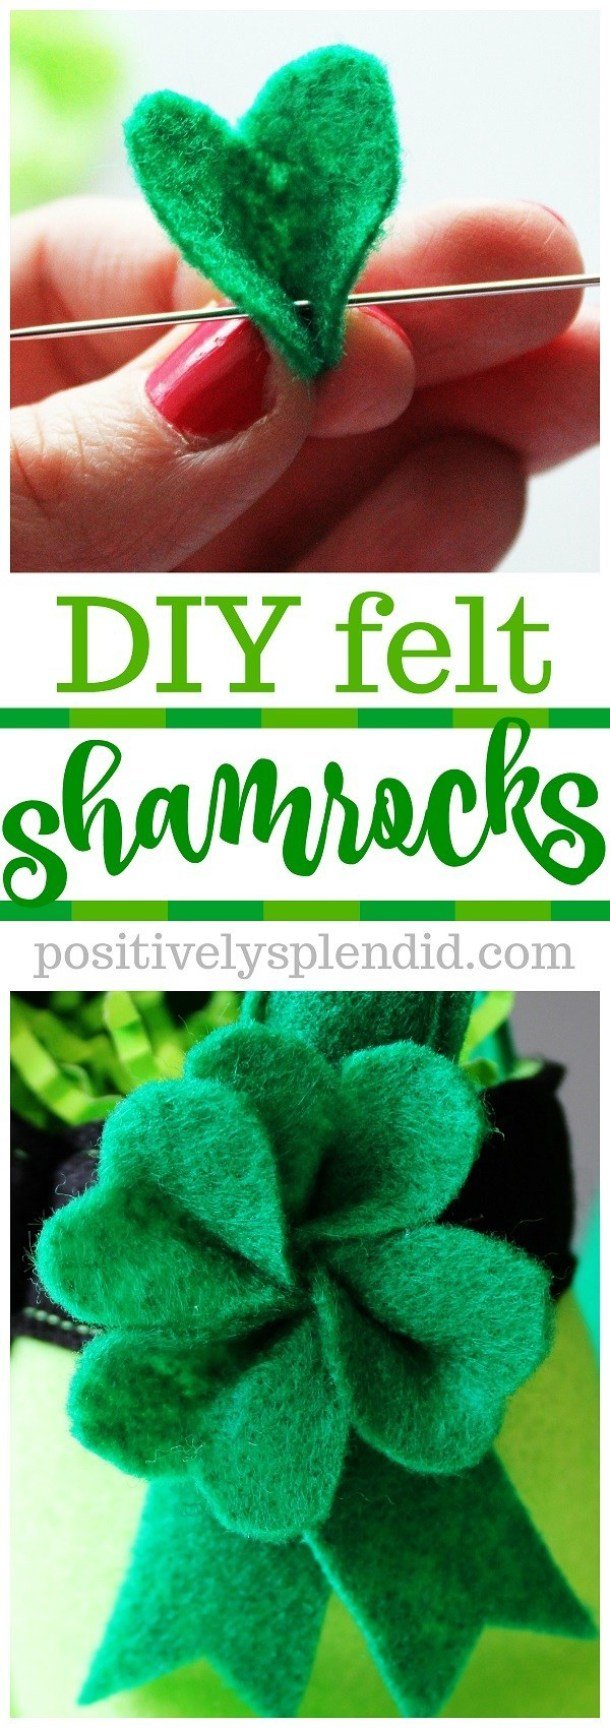 Awesome DIY St. Patrick's Day Decor Projects to Make (Part 6) - Diy St. Patrick's Day Decorations, DIY St. Patrick's Day Decoration, DIY St. Patrick's Day Decor, DIY St. Patrick's Day